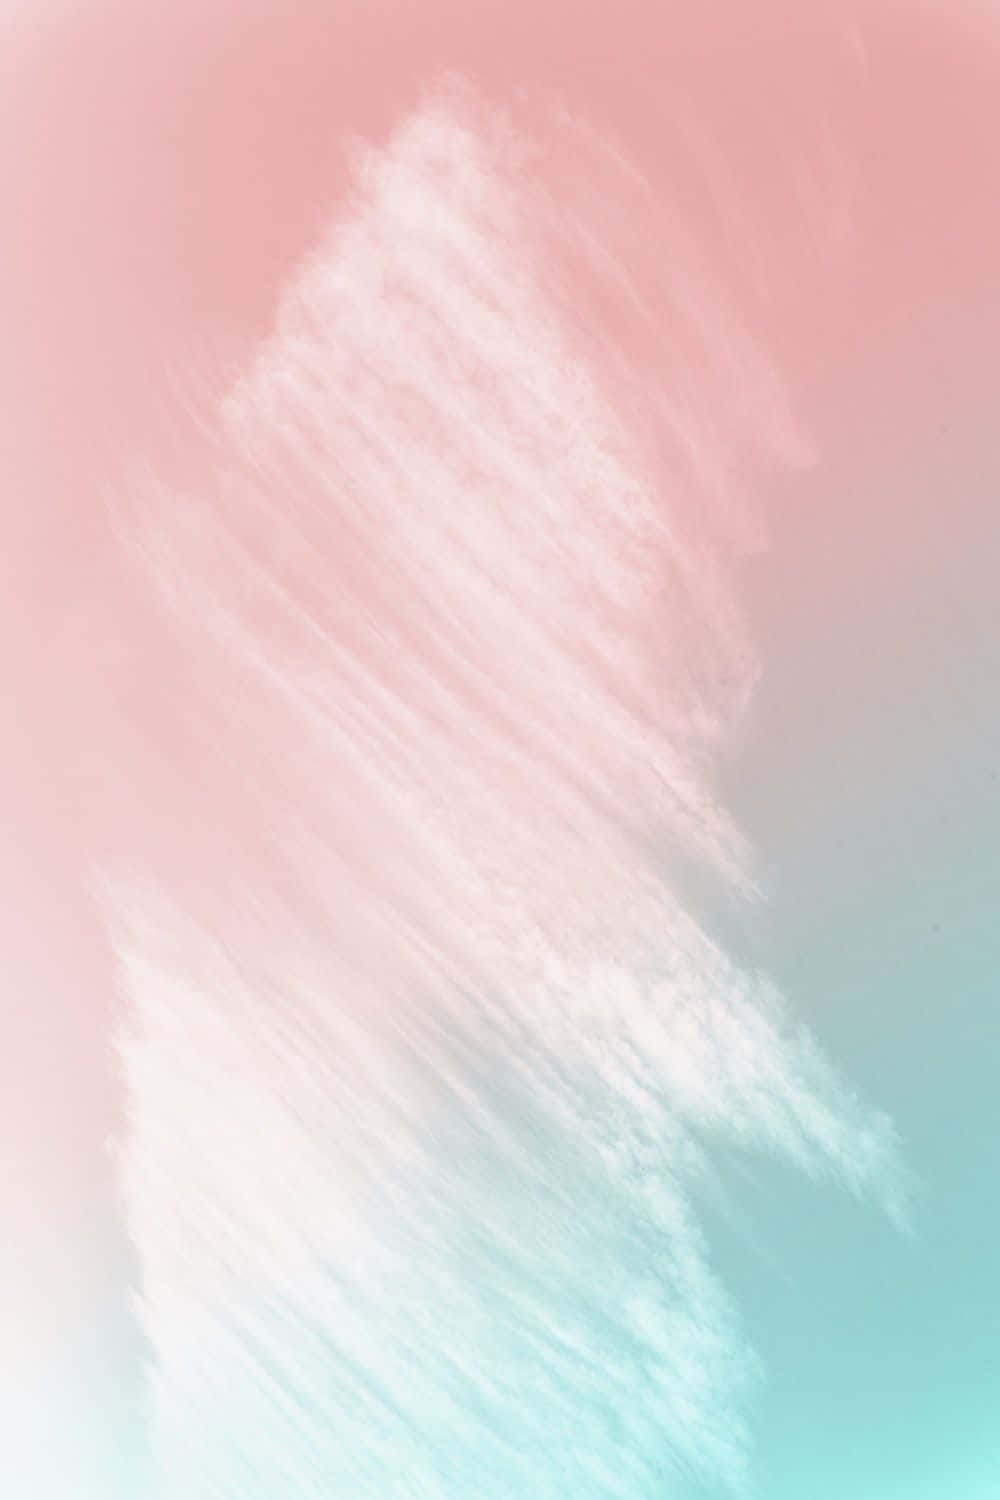 A Pink And Turquoise Background With A Cloud Wallpaper